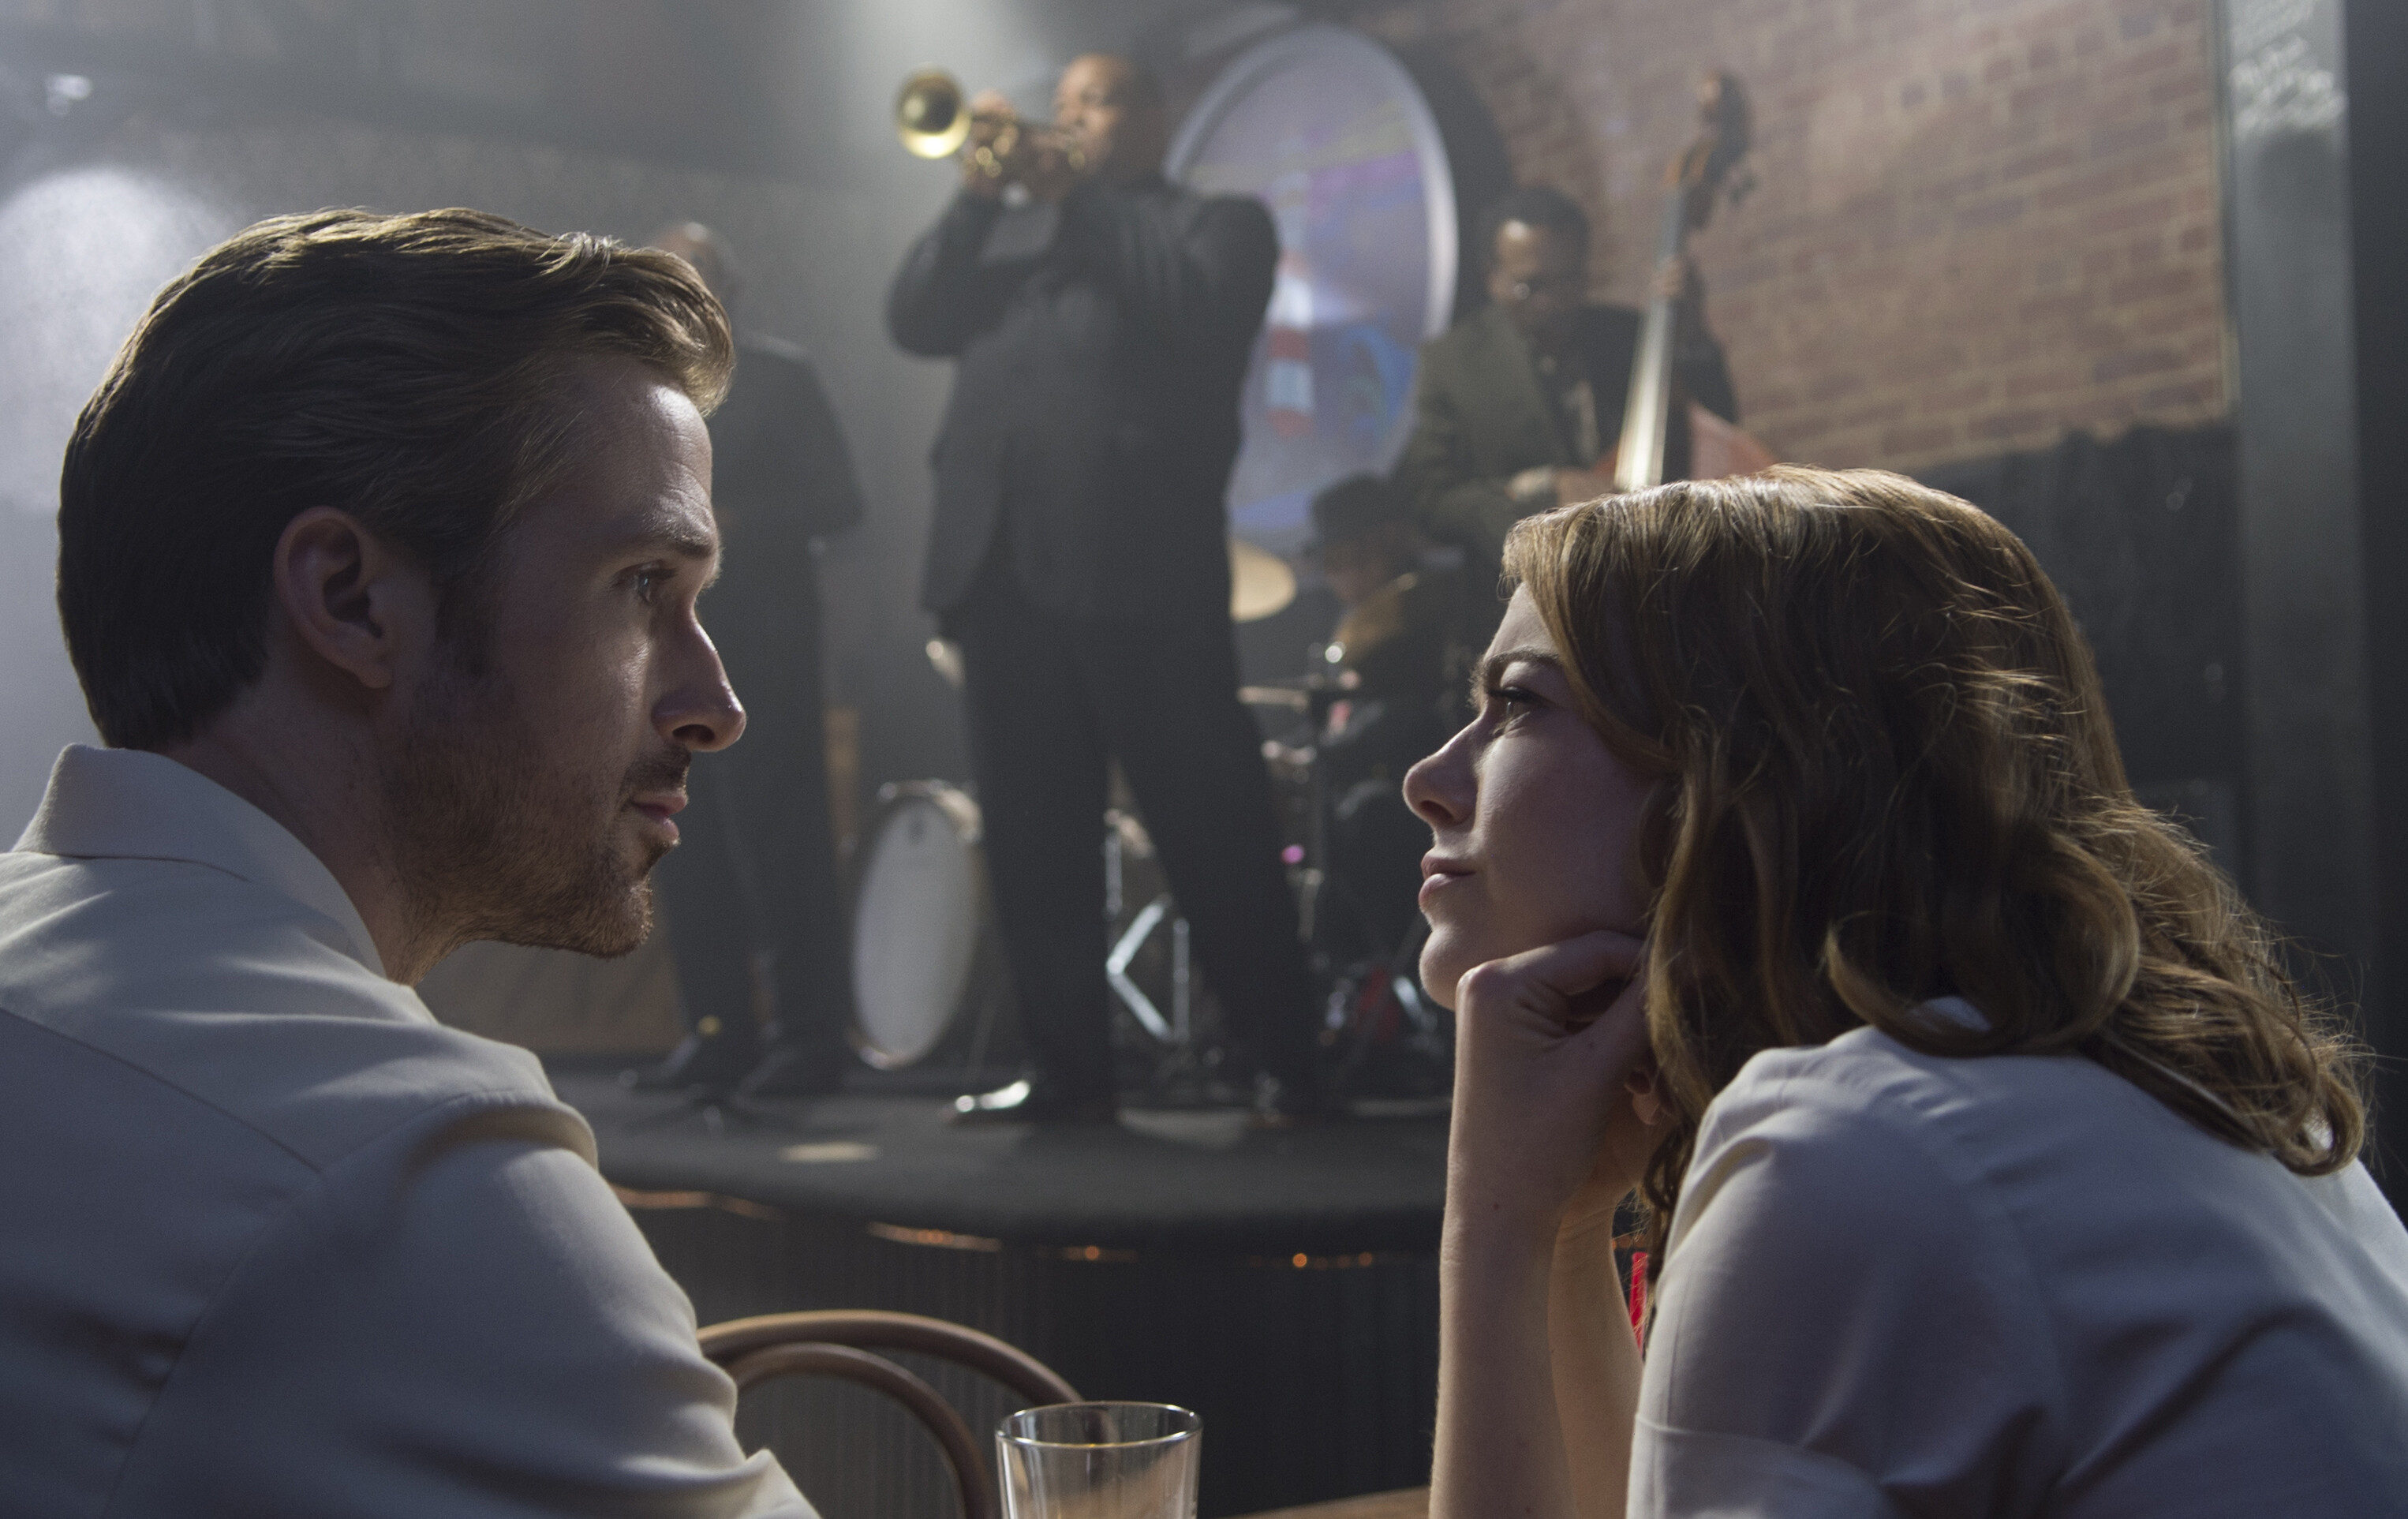 La La Land: After moving to Los Angeles in 2010, Chazelle penned the script but did not find a studio willing to finance the production without changes to his design. 3060x1930 HD Wallpaper.